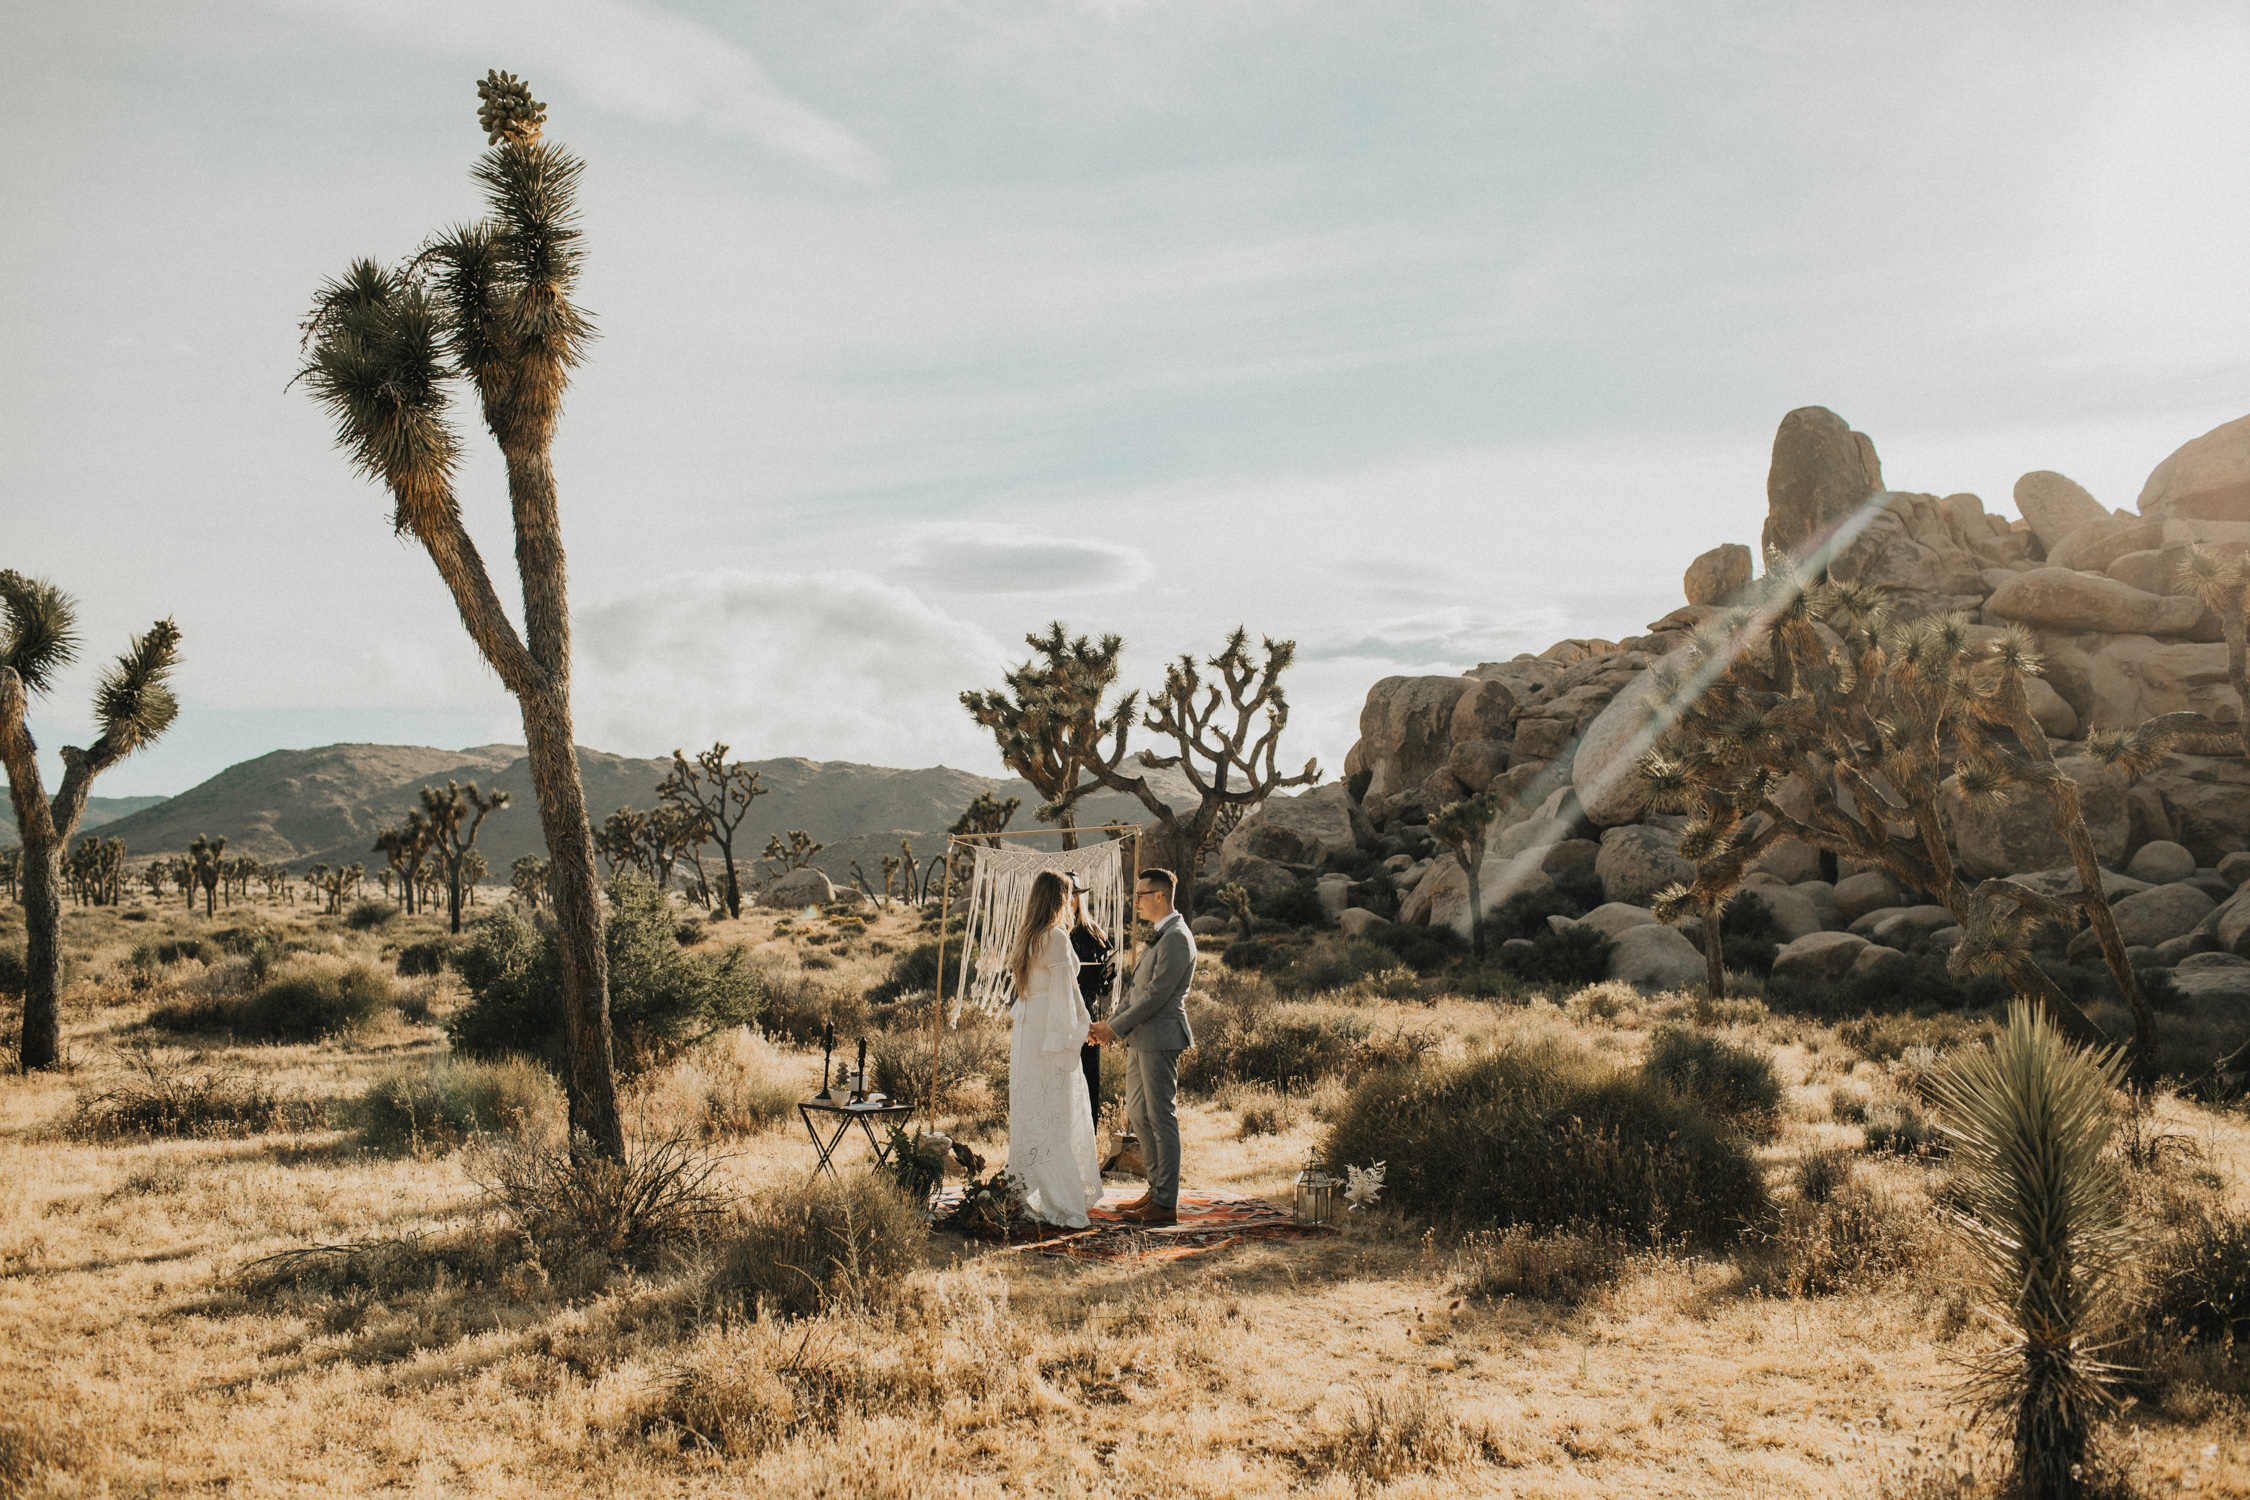 A couple's elopement ceremony in Joshua Tree National Park.